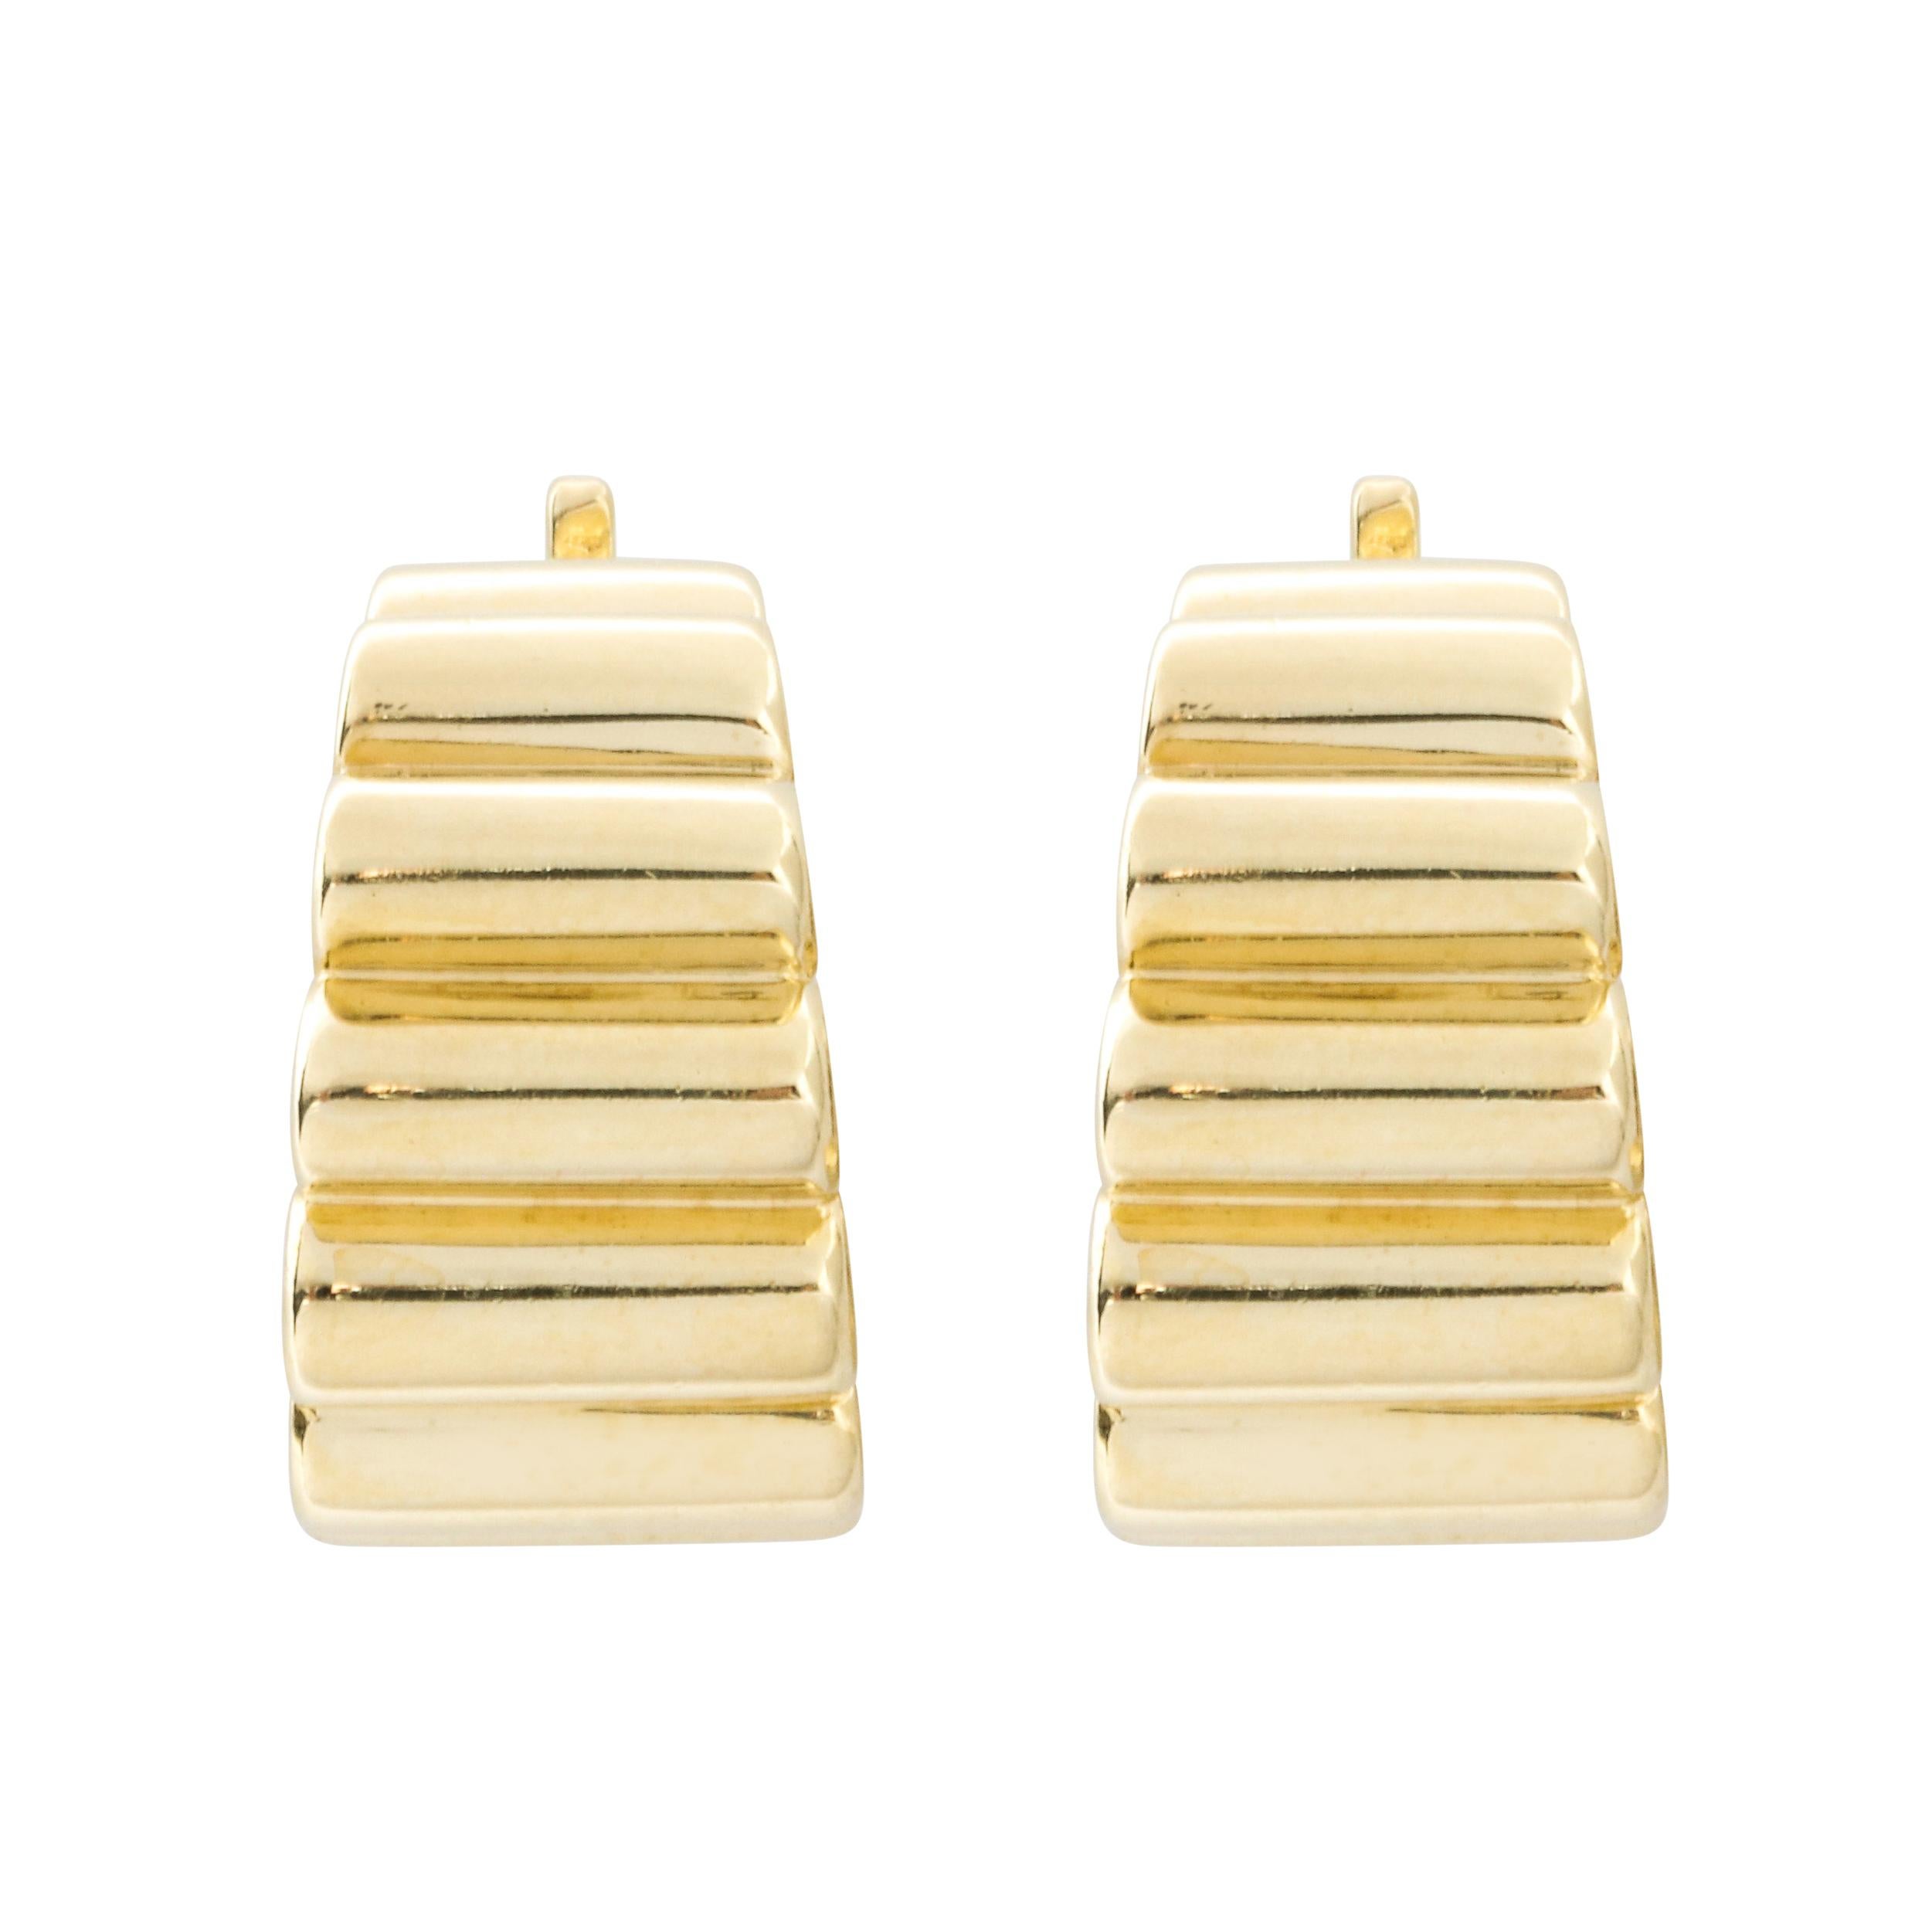 This elegant pair of 14kt yellow gold earrings were realized by Tiffany & Co. one of America's premiere luxury makers of jewelry and other precious objects since 1837. They feature rounded bodies composed of seven adjoined cylindrical forms in